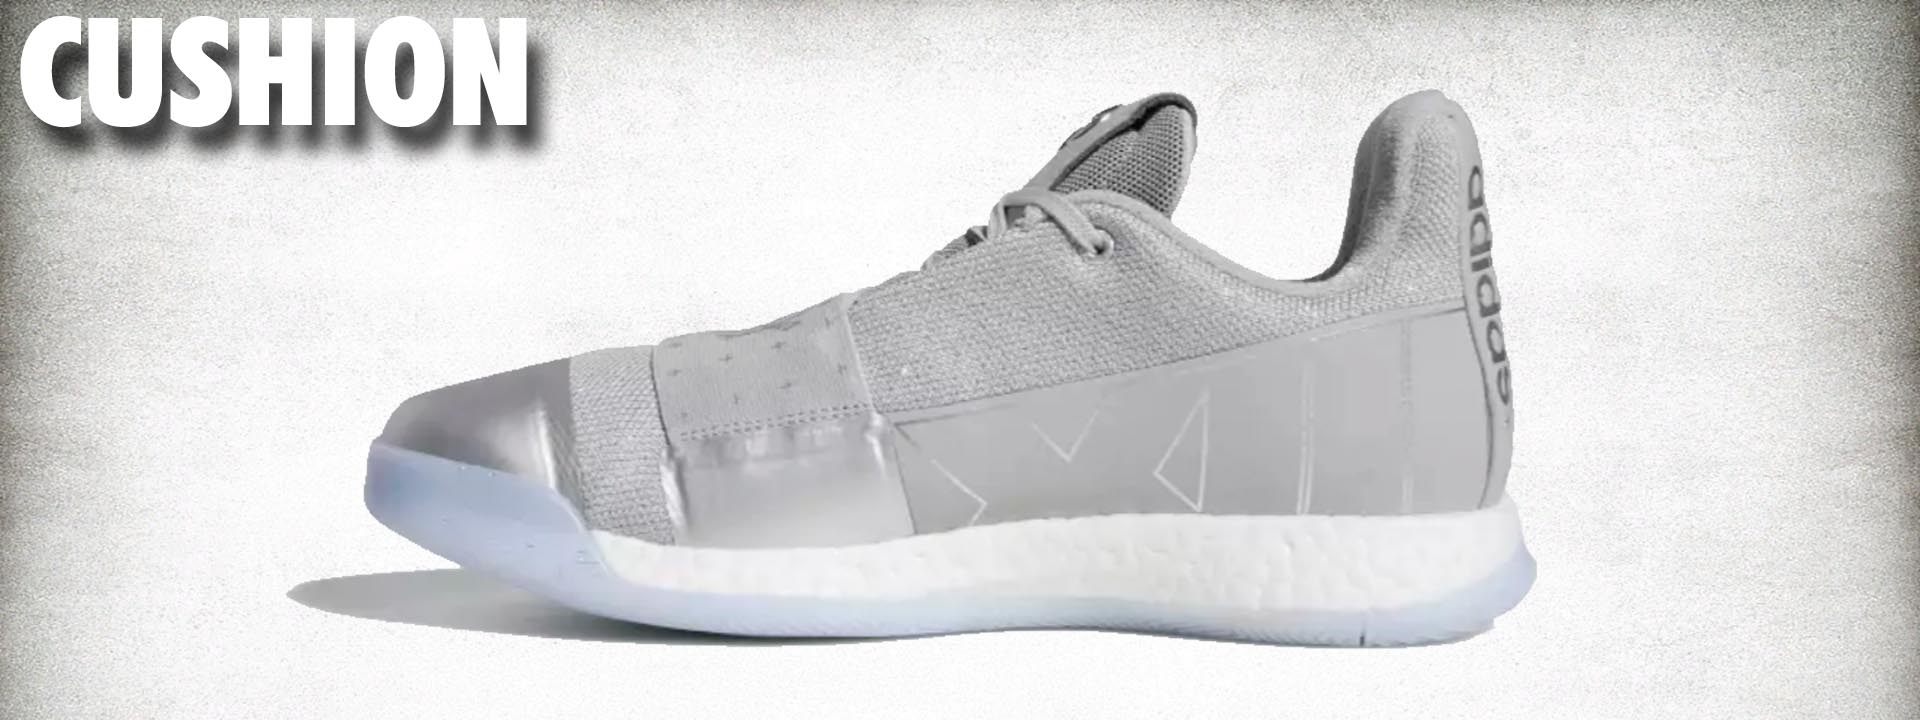 adidas harden vol 3 performance review cushion